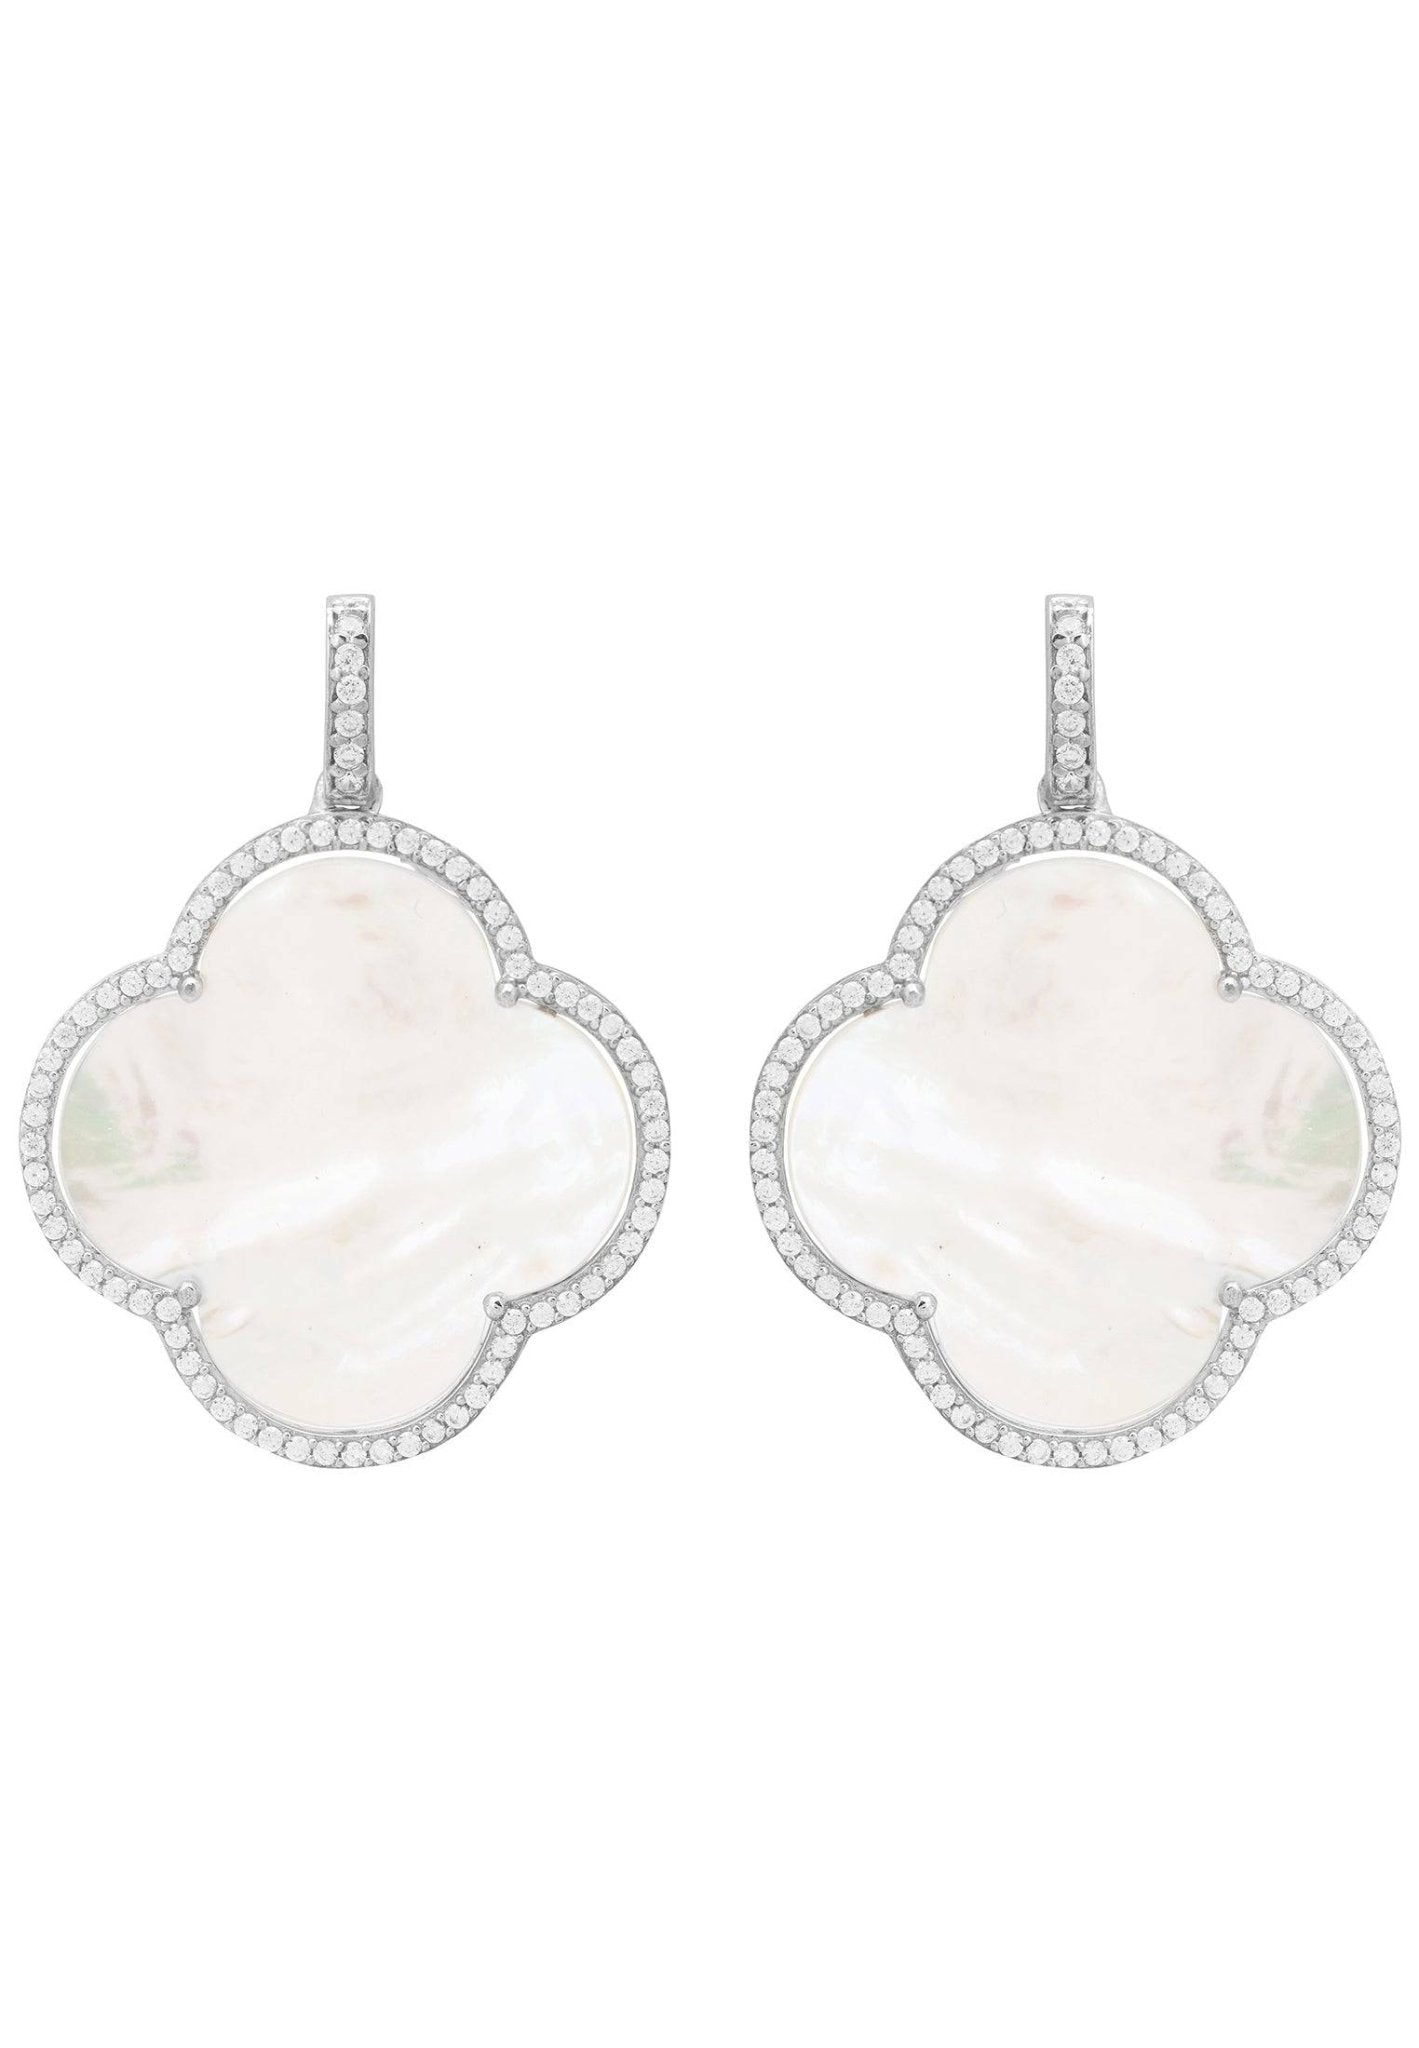 Mother of Pearl Clover Earring Set Gold - Tokasepeti